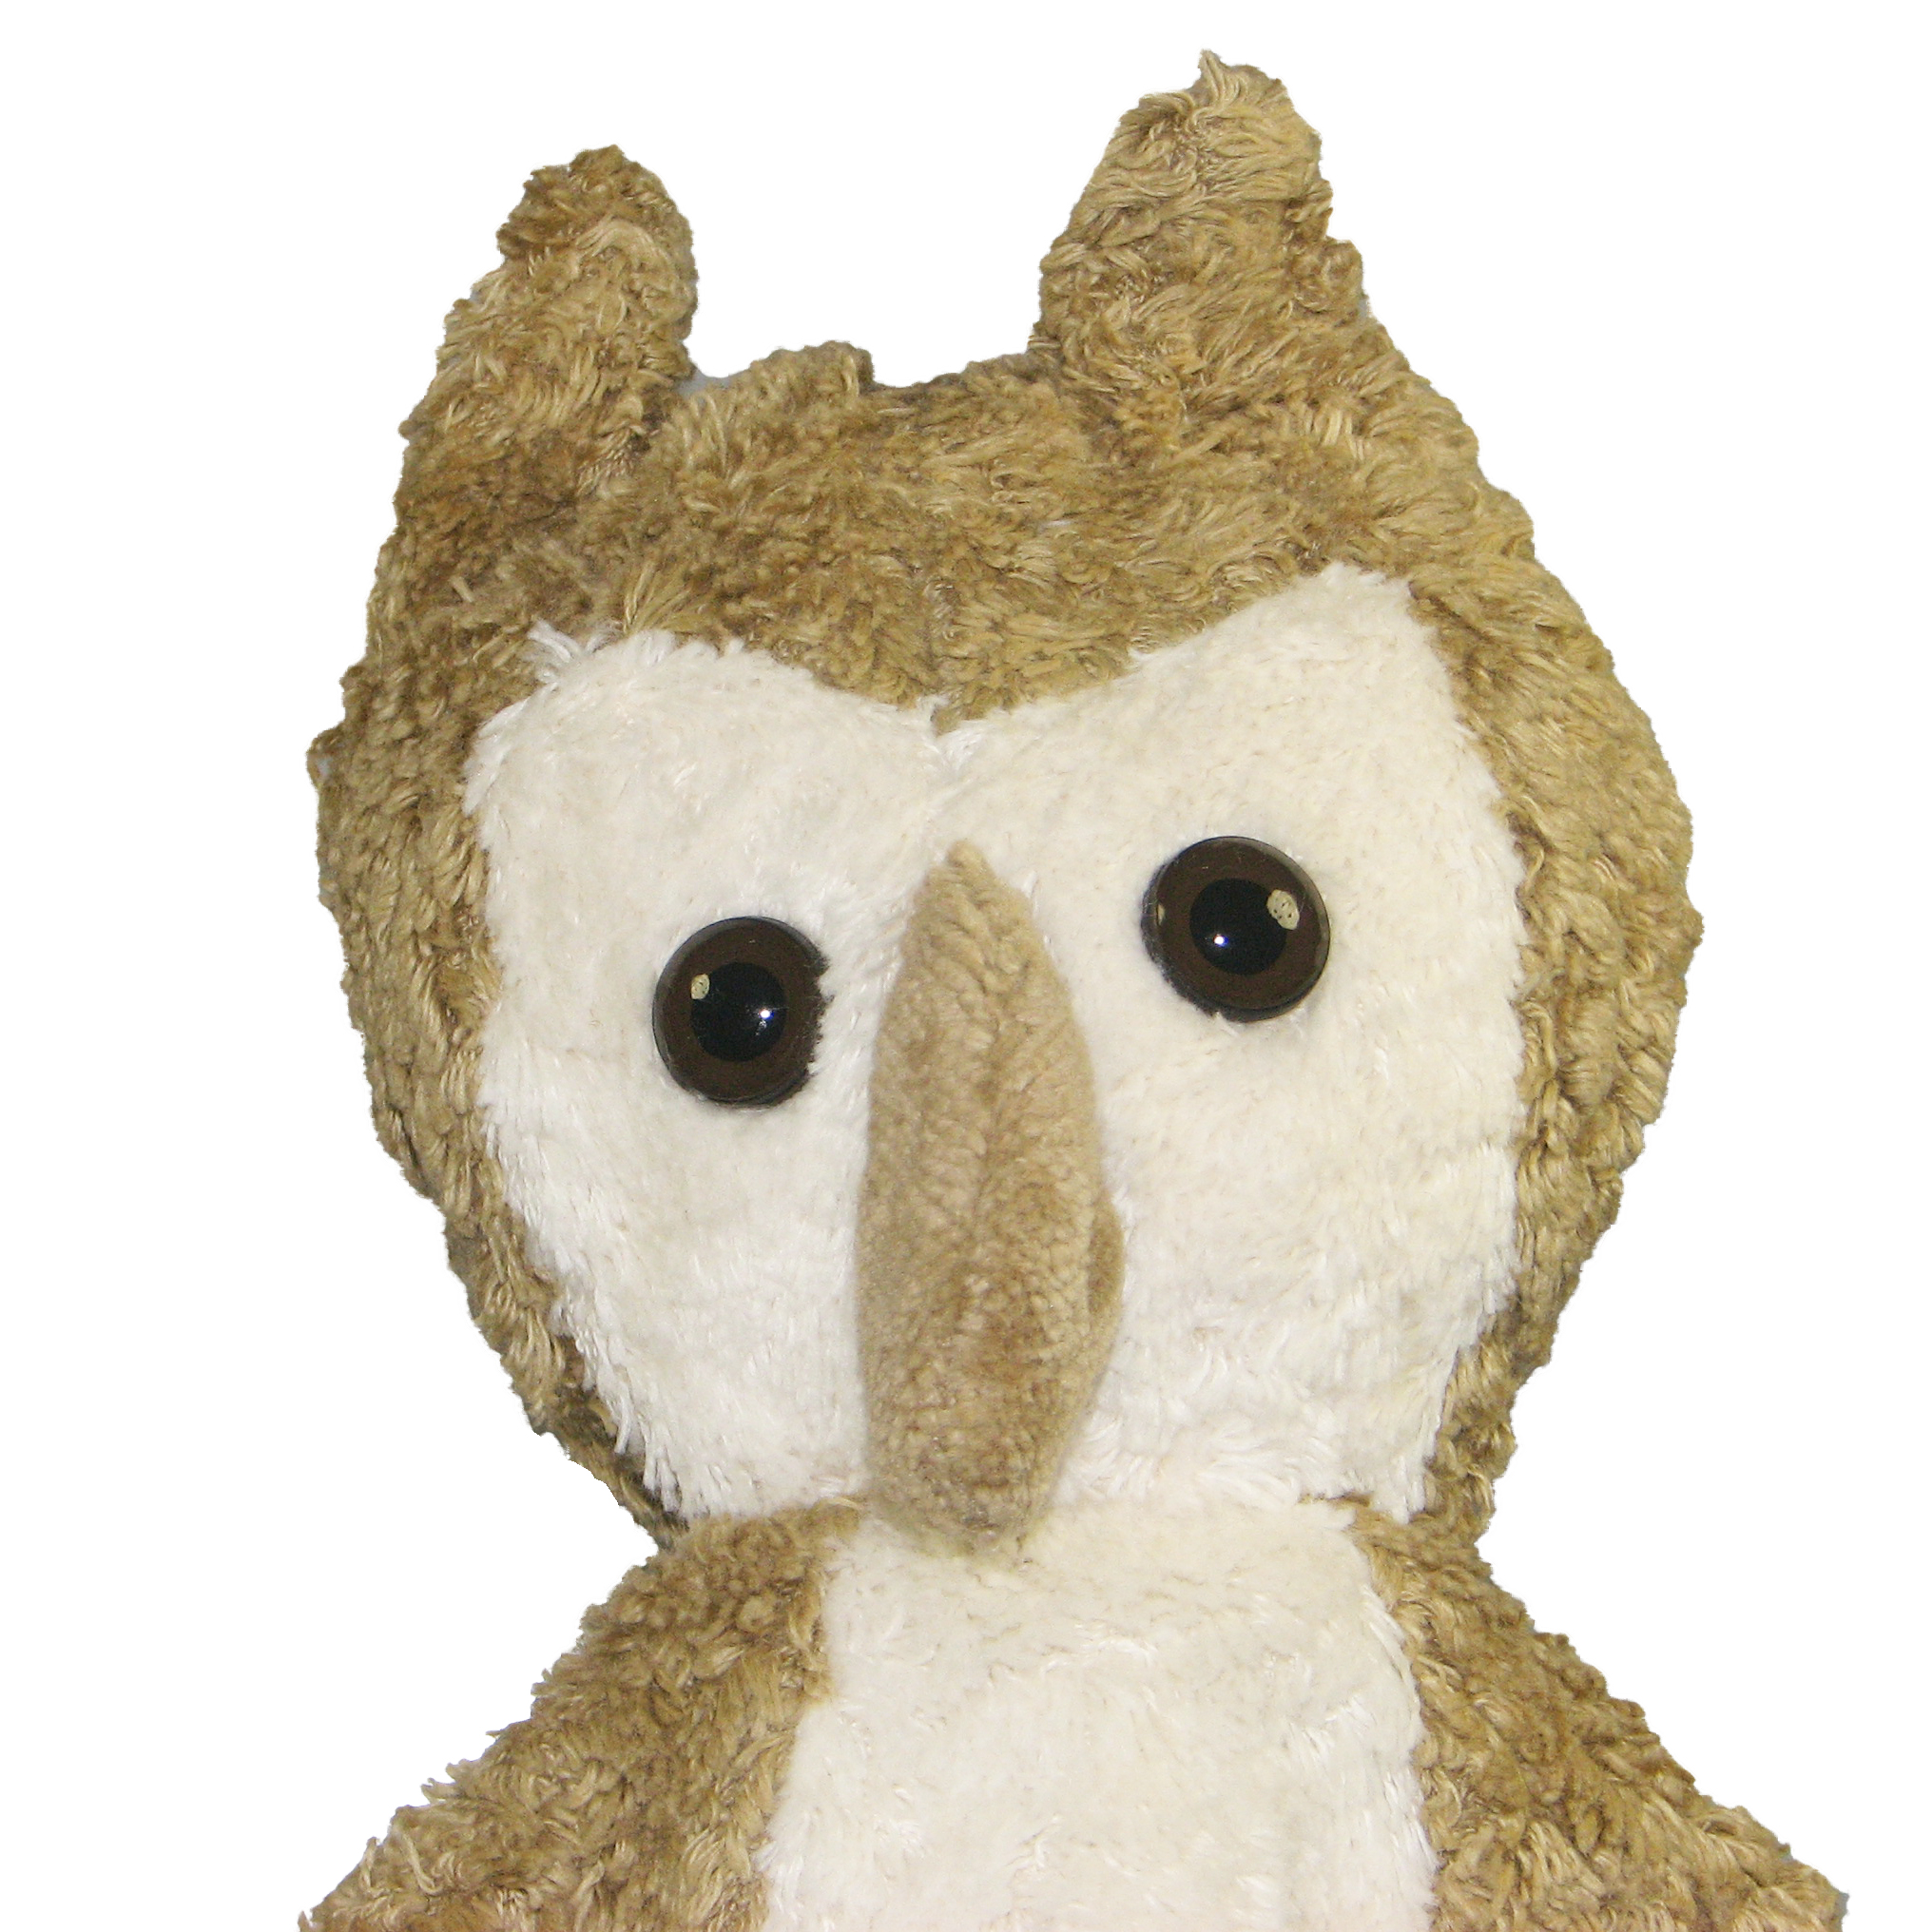 Hand puppet beige owl - made of natural material - by Kallisto